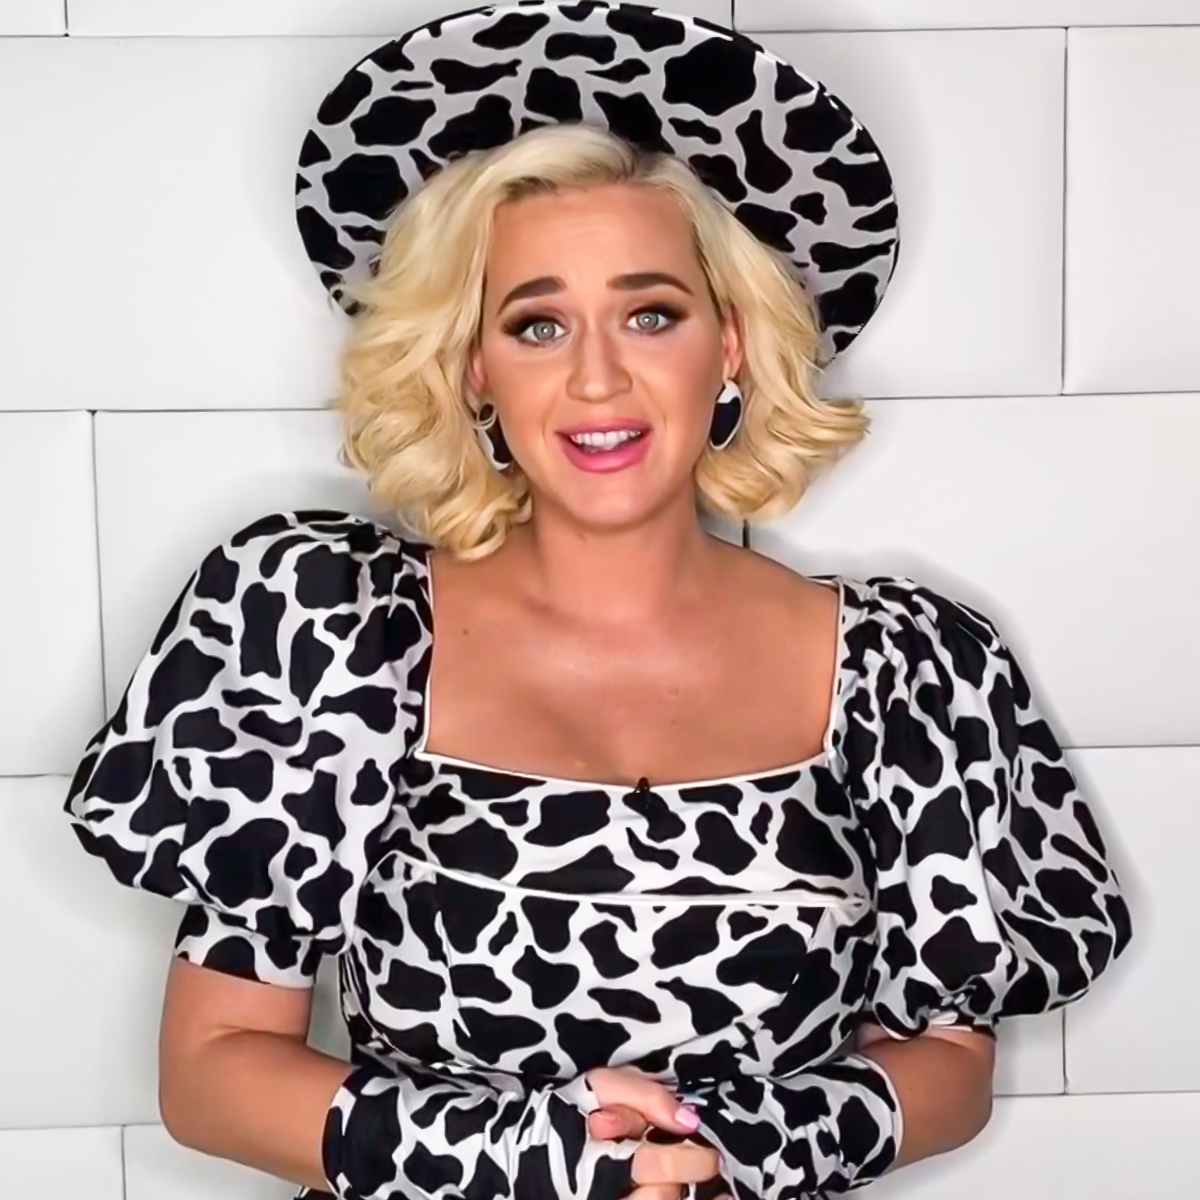 Katy Perry reveals how daughter Daisy “changed my life”